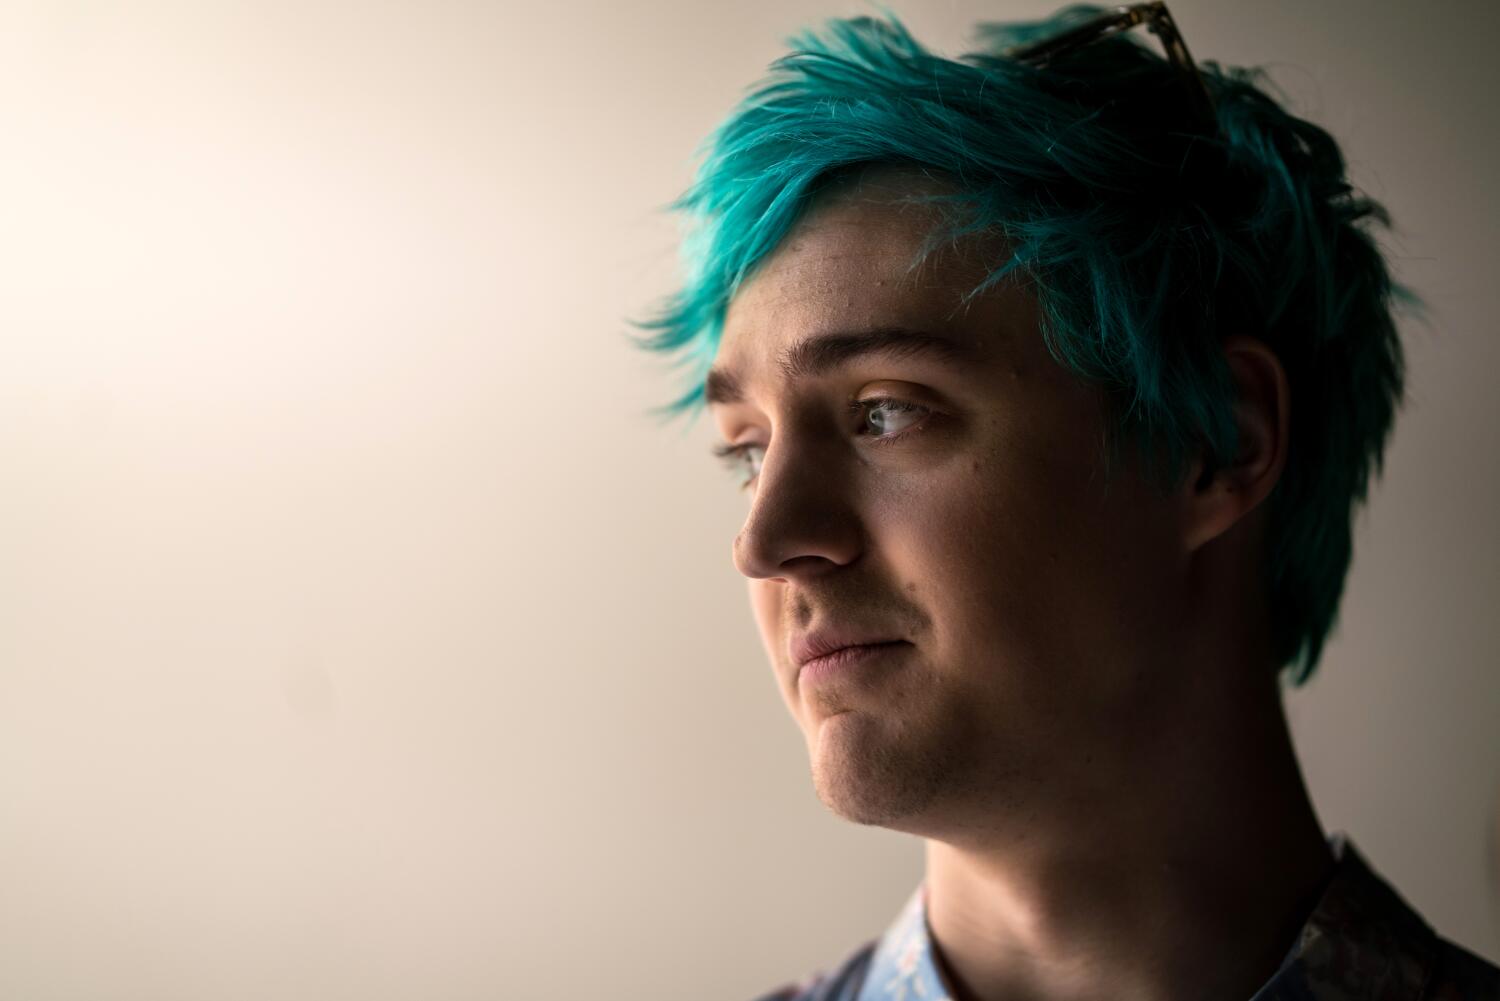 Twitch star Tyler 'Ninja' Blevins reveals skin cancer diagnosis: 'In a bit of shock'